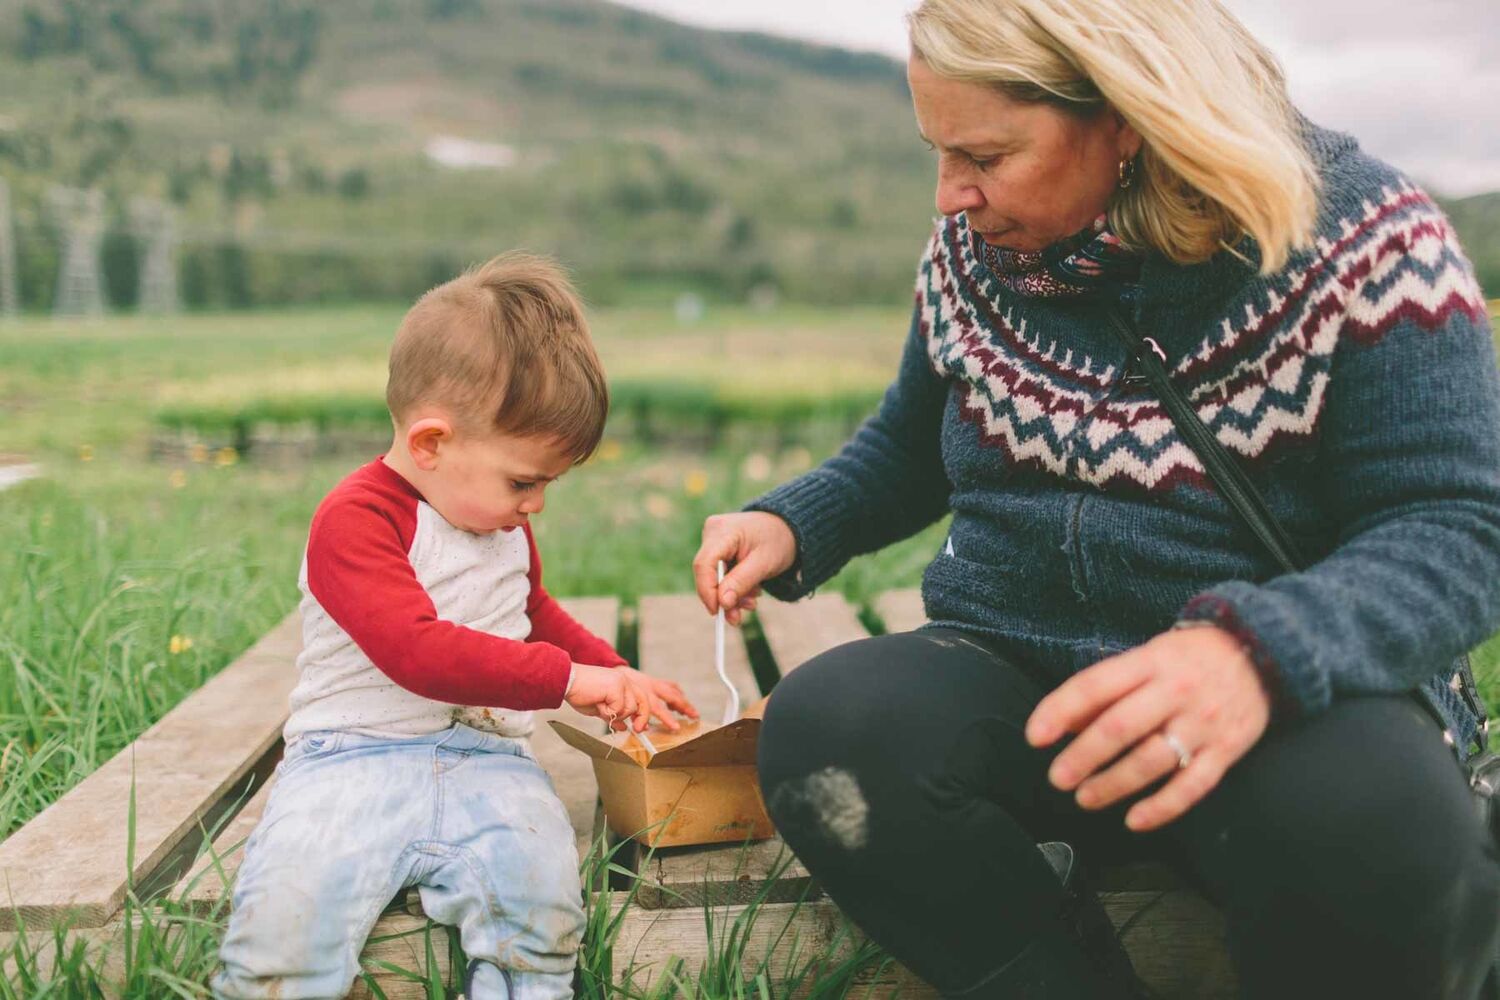 Grandmother And Toddler Sitting On Wooden Crate In Field Eating Take Away